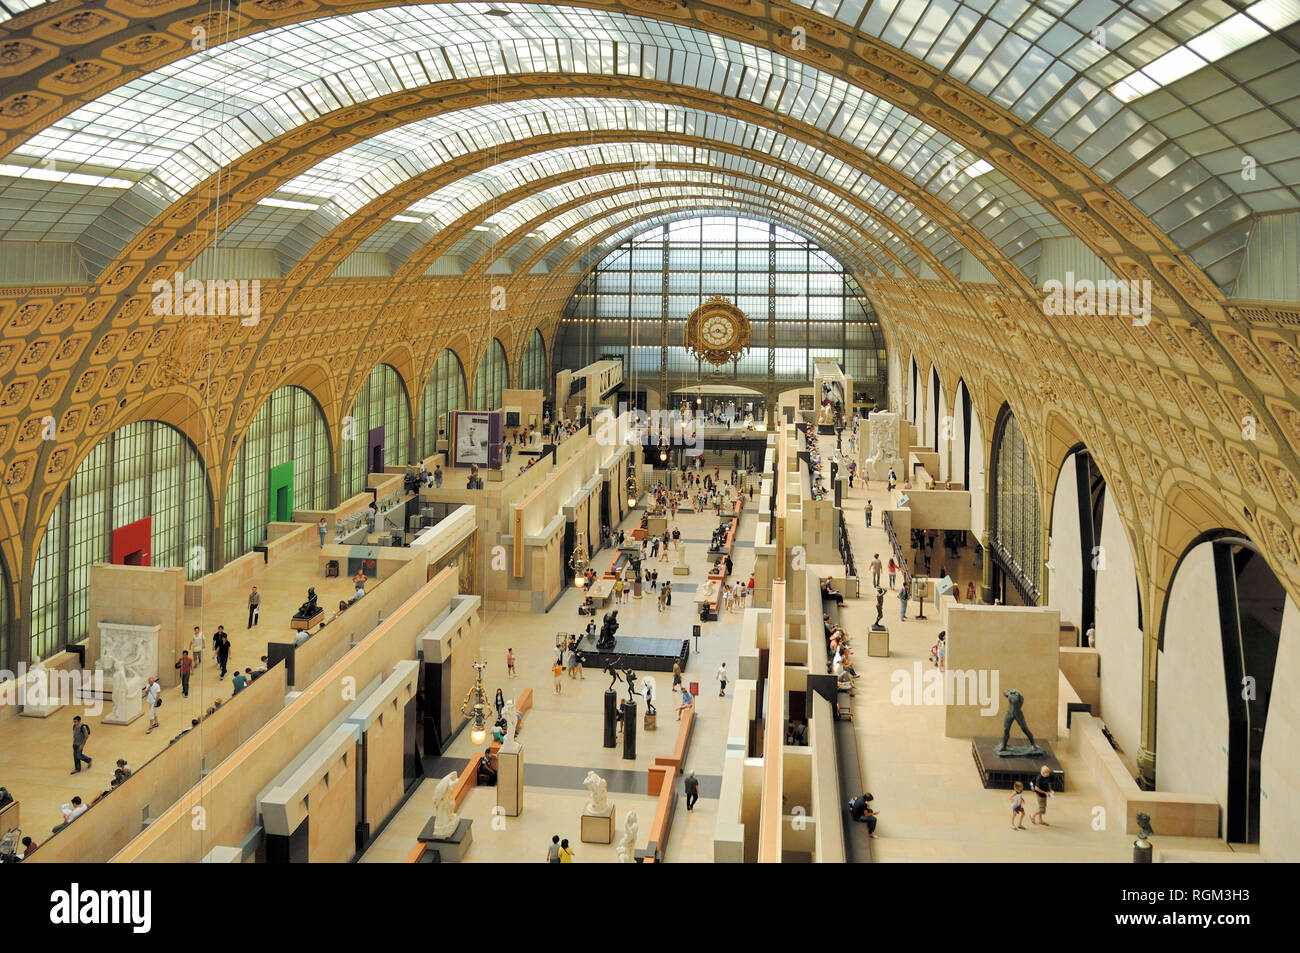 Main Hall and Interior of Musée d'Orsay, or Orsay Art Museum and Gallery,  Housed in a former Beaux-Arts Railway Station (1848-1914) Paris France  Stock Photo - Alamy